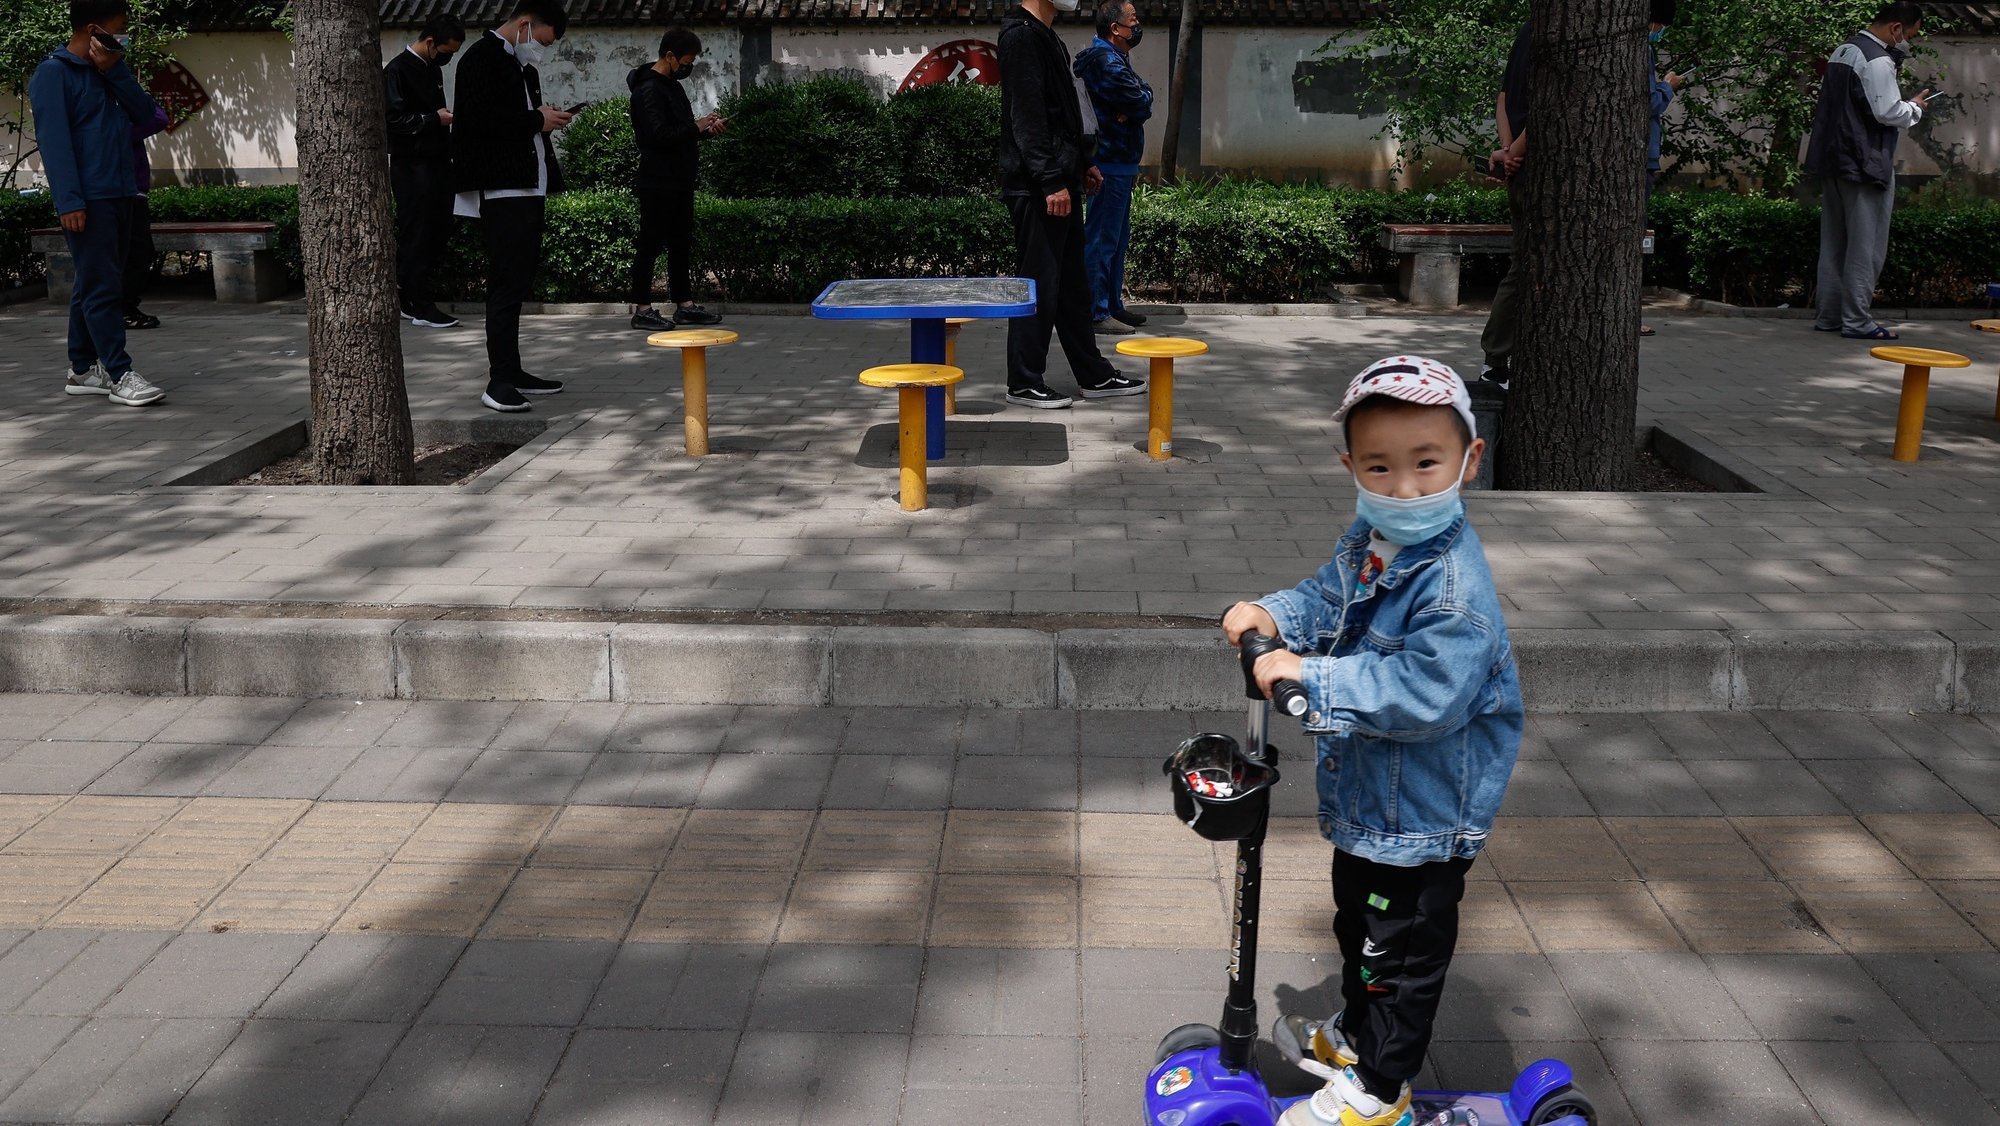 epa09935114 A child rides a scooter along people lining up for a COVID-19 test in Beijing, China, 09 May 2022. Beijing continues its mass testing in an attempt to curb the spread of COVID-19 as dozens of subway stations and bus routes in Beijing remain shut down with public places requiring a negative test result before entering.  EPA/MARK R. CRISTINO